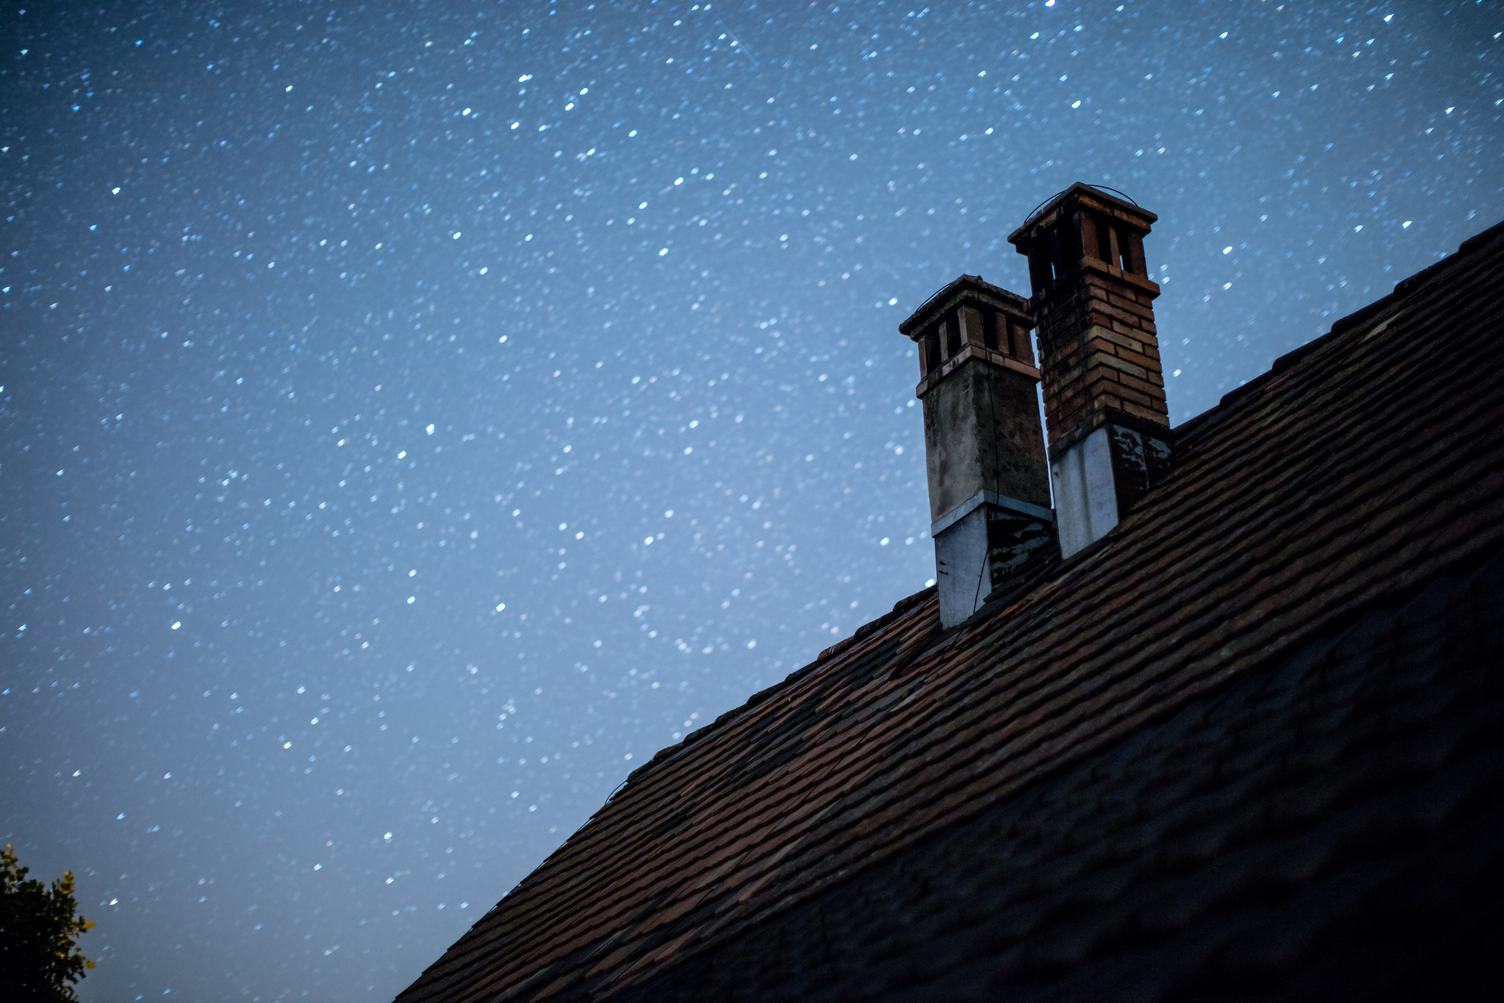 A Starry Sky Above the Roof